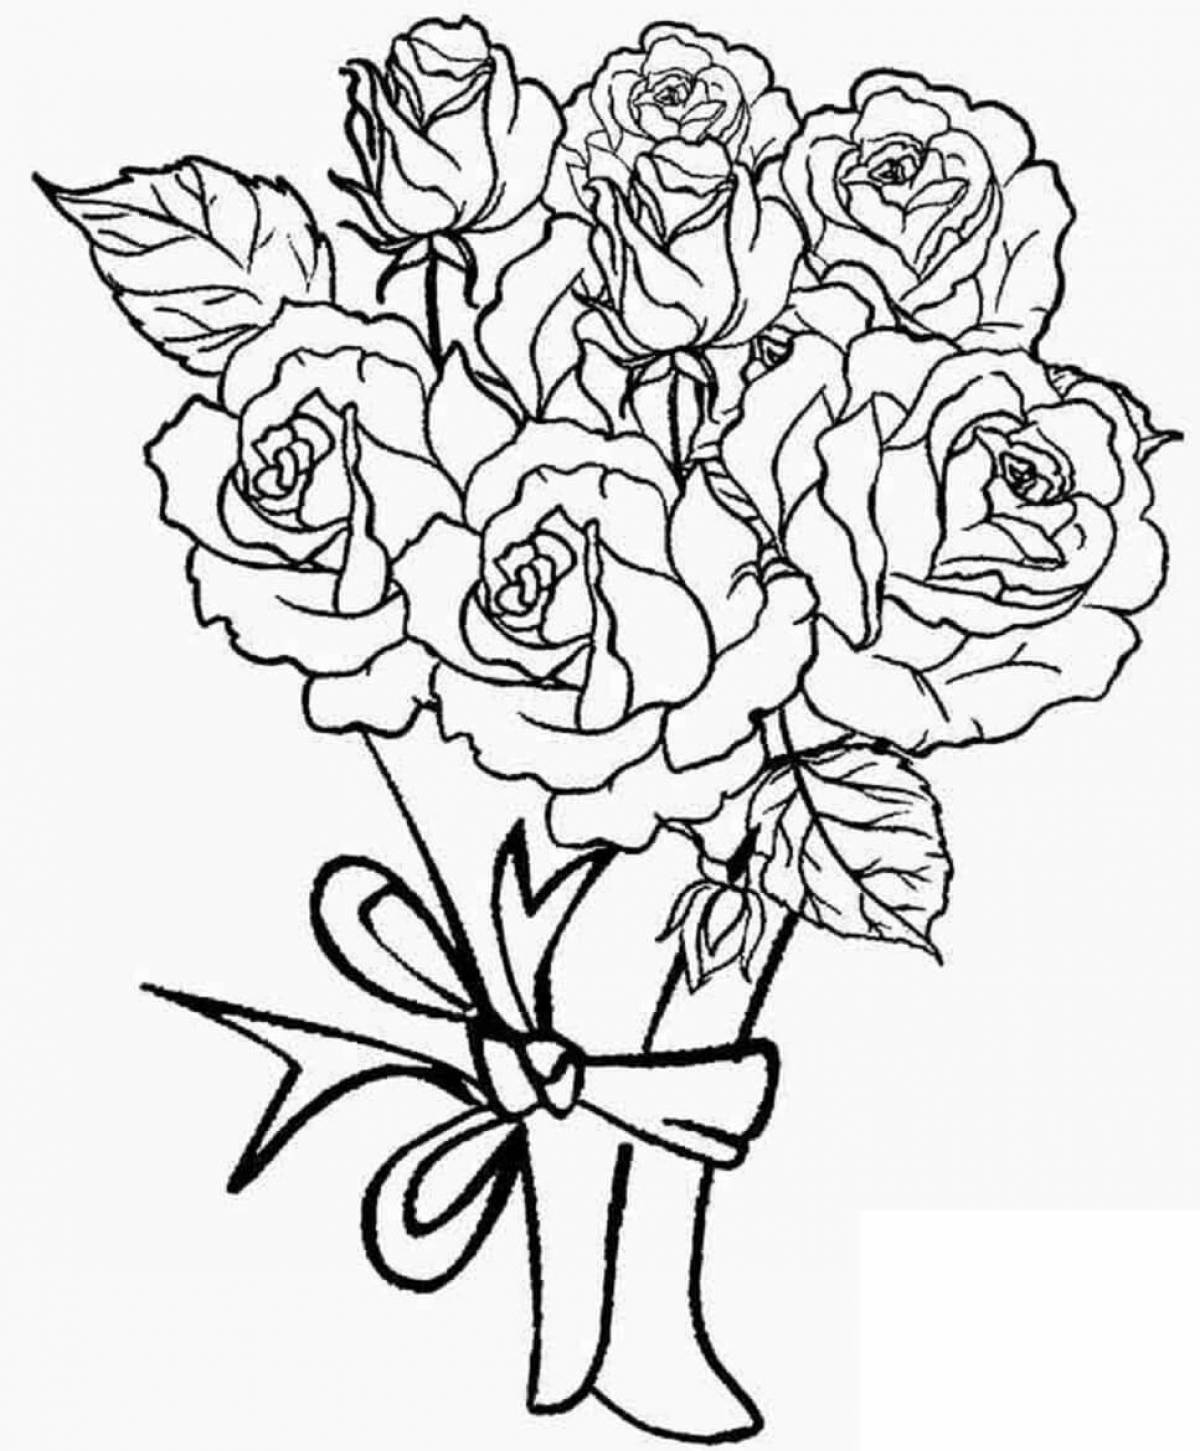 Luminous rose coloring by numbers